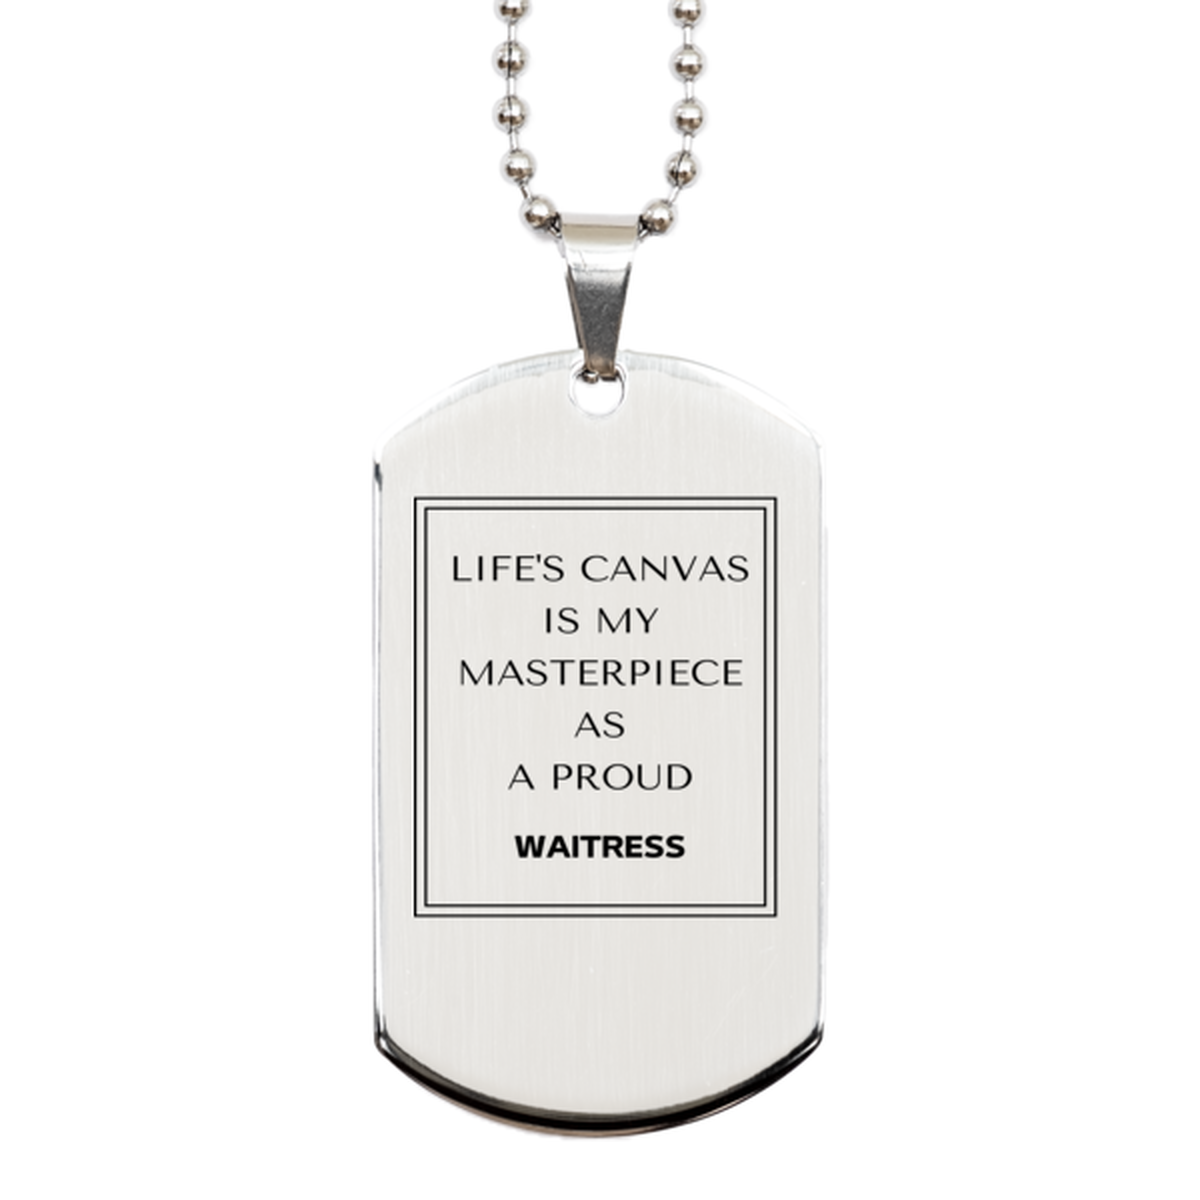 Proud Waitress Gifts, Life's canvas is my masterpiece, Epic Birthday Christmas Unique Silver Dog Tag For Waitress, Coworkers, Men, Women, Friends